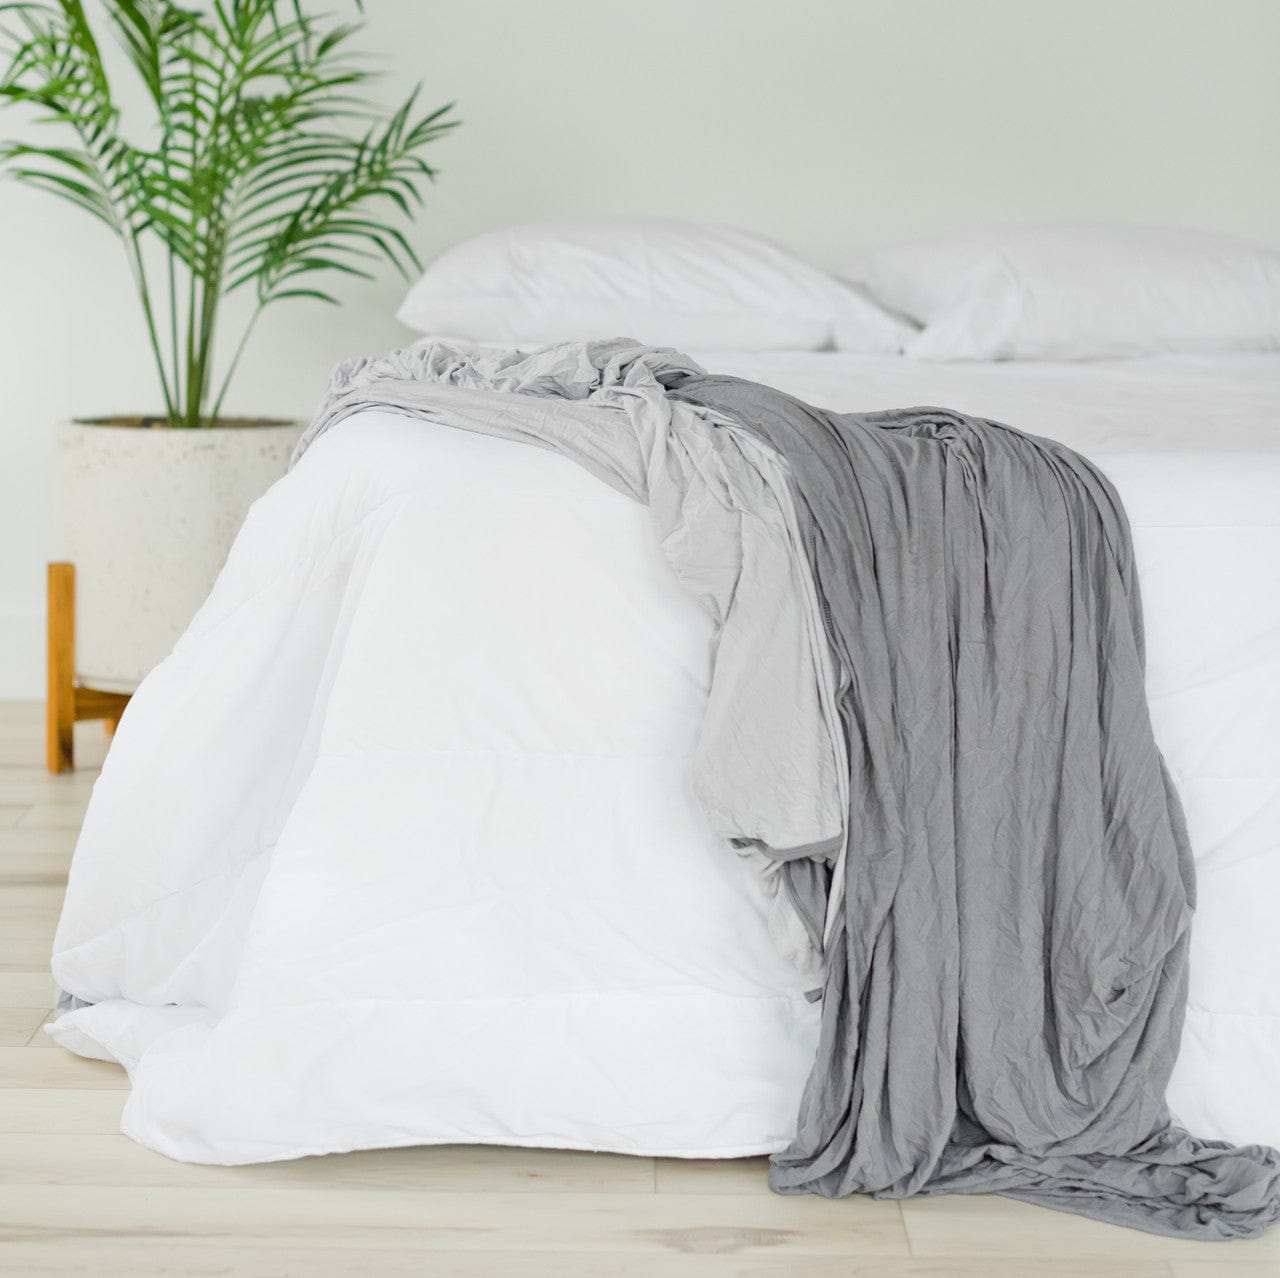 Light and dark grey bed luxurious blanket.